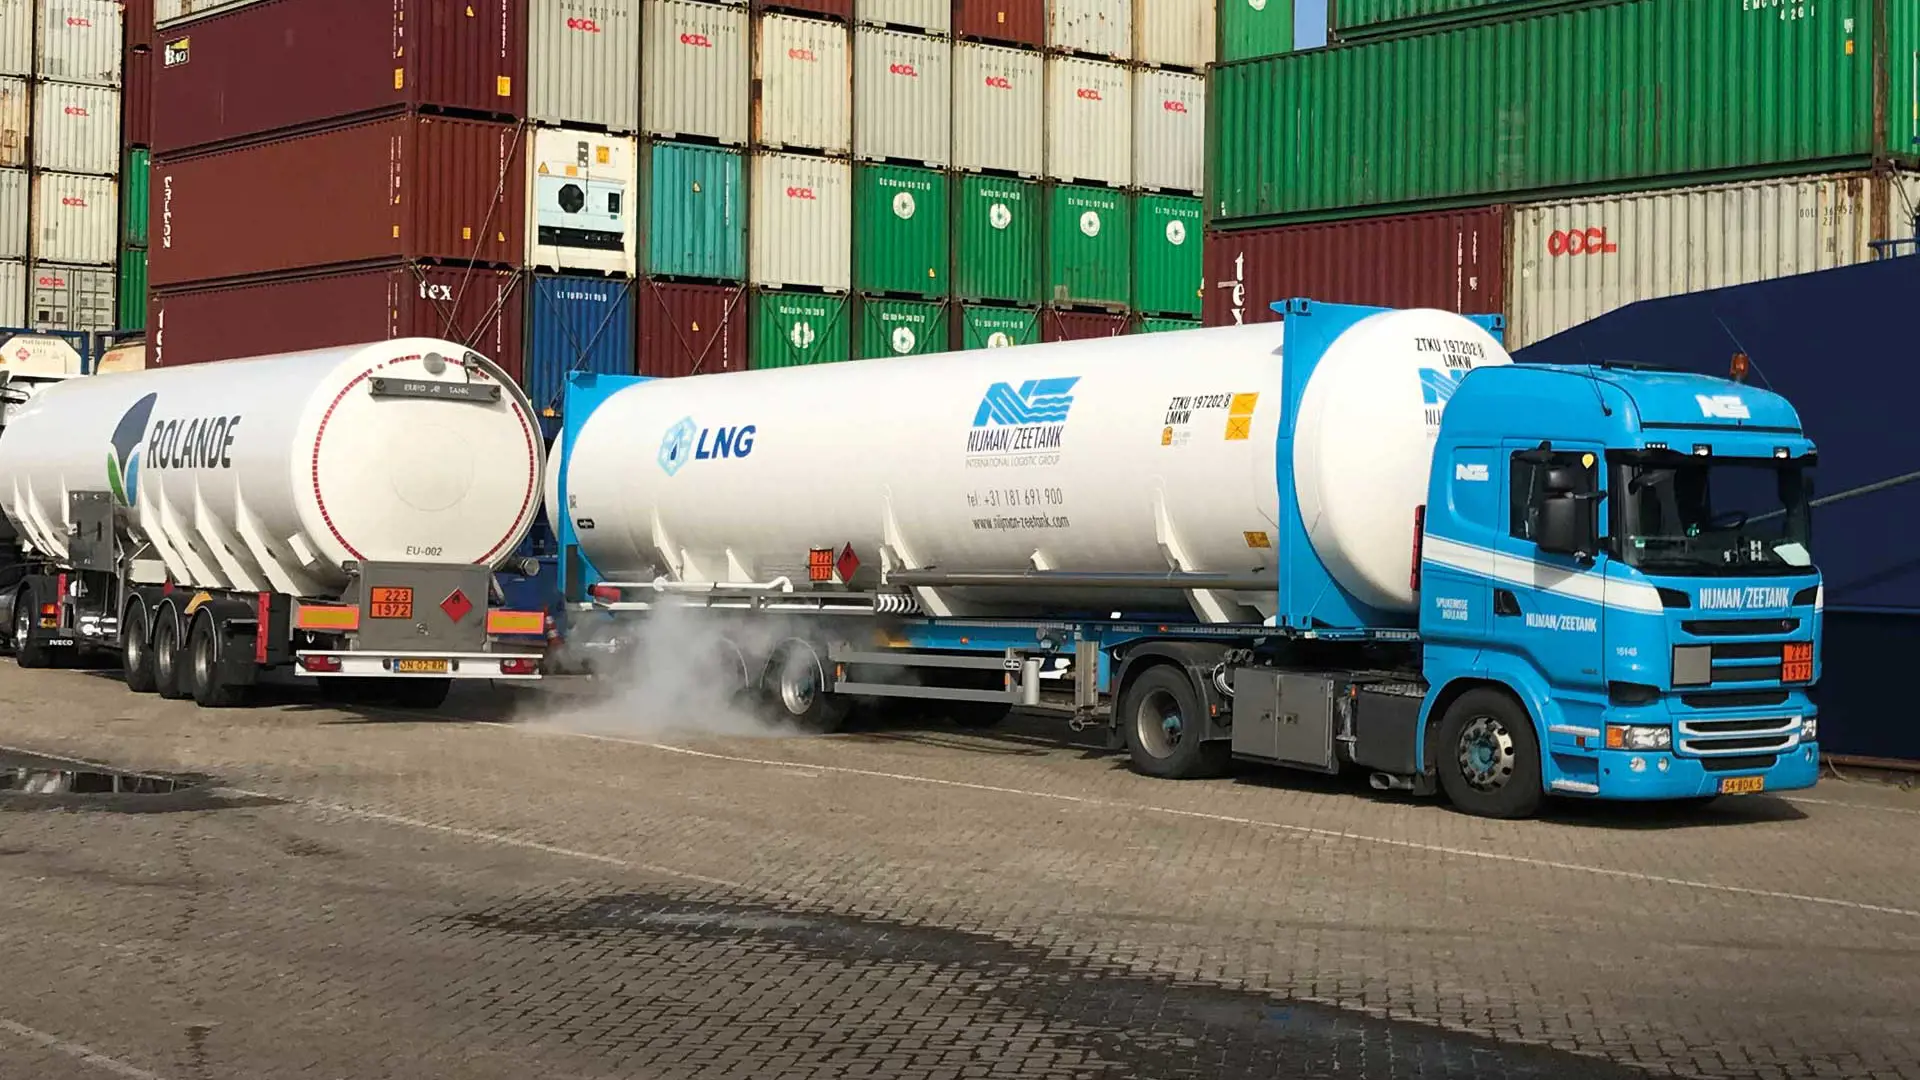 LNG trucks using the Y-piece to deliver fuel simultaneously